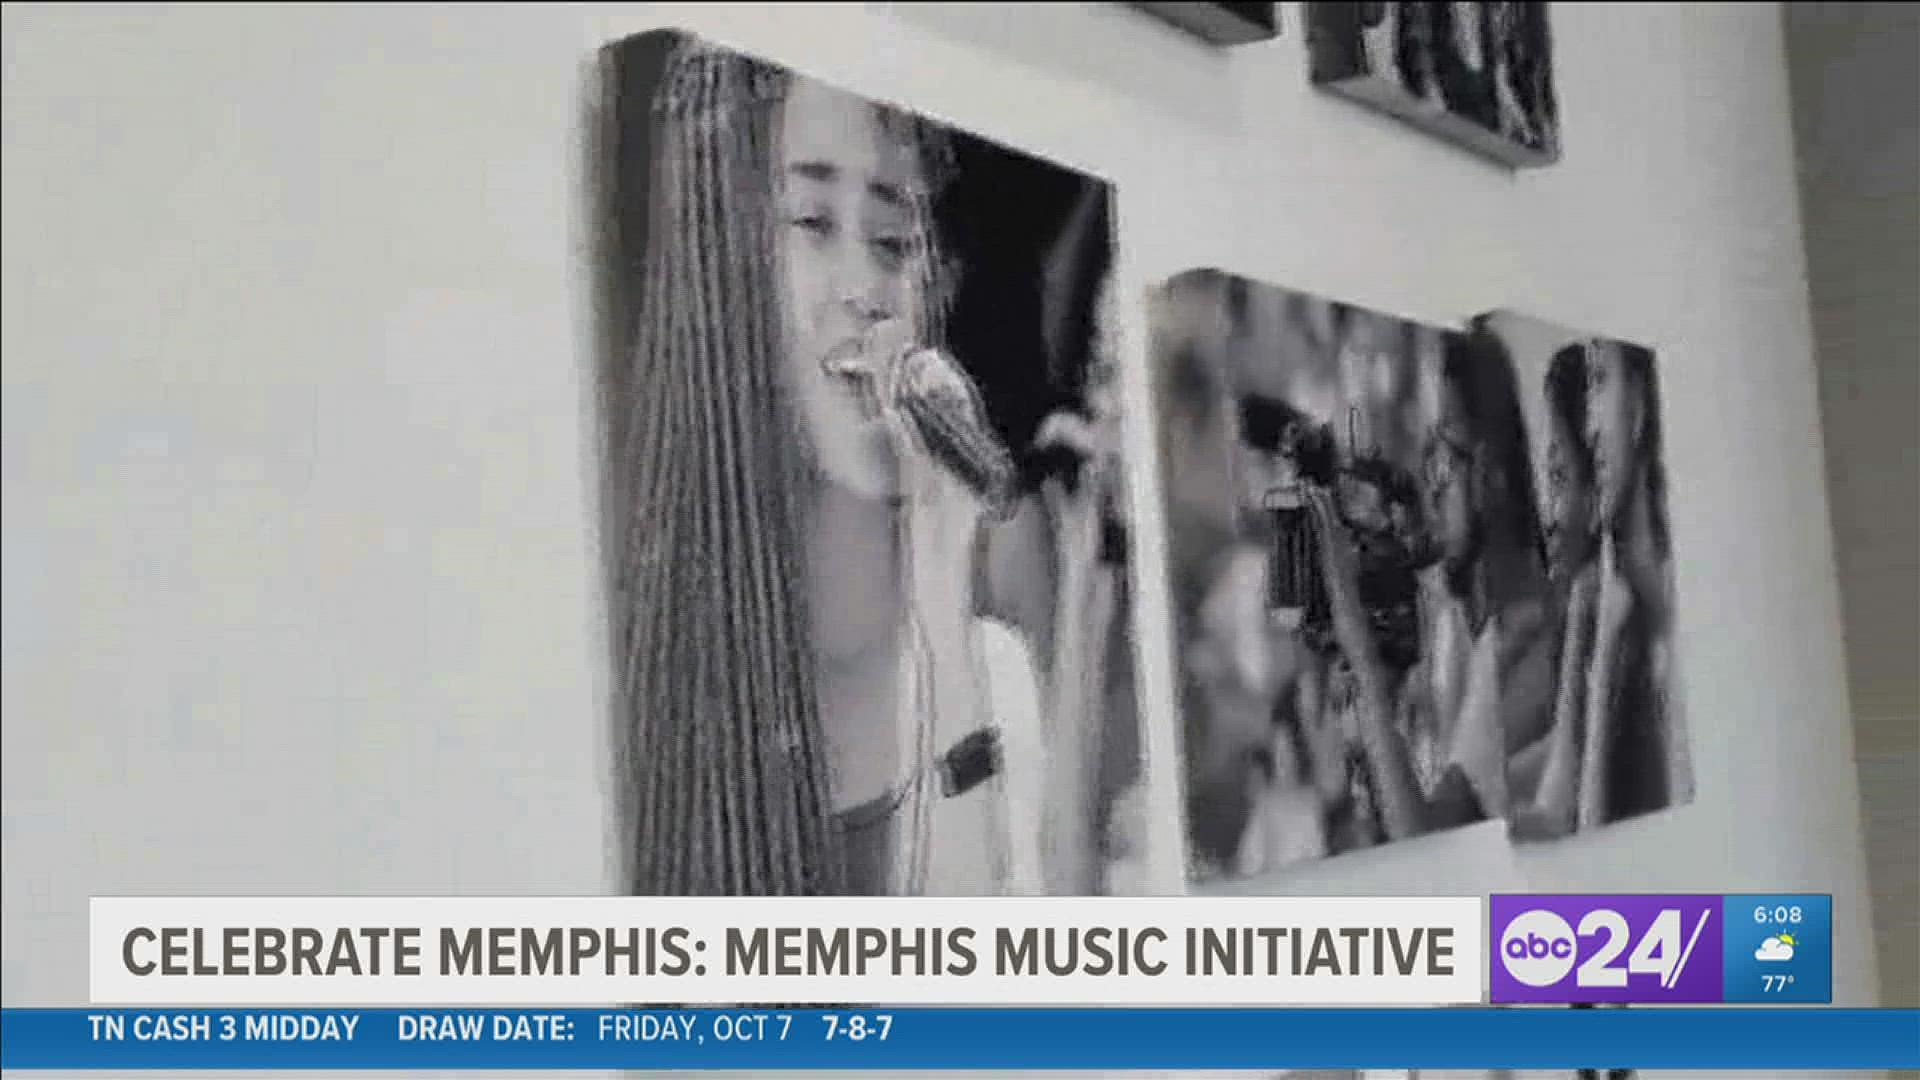 Songwriting, singing, and playing instruments are just some of the options Memphis Music Initiative offers students.